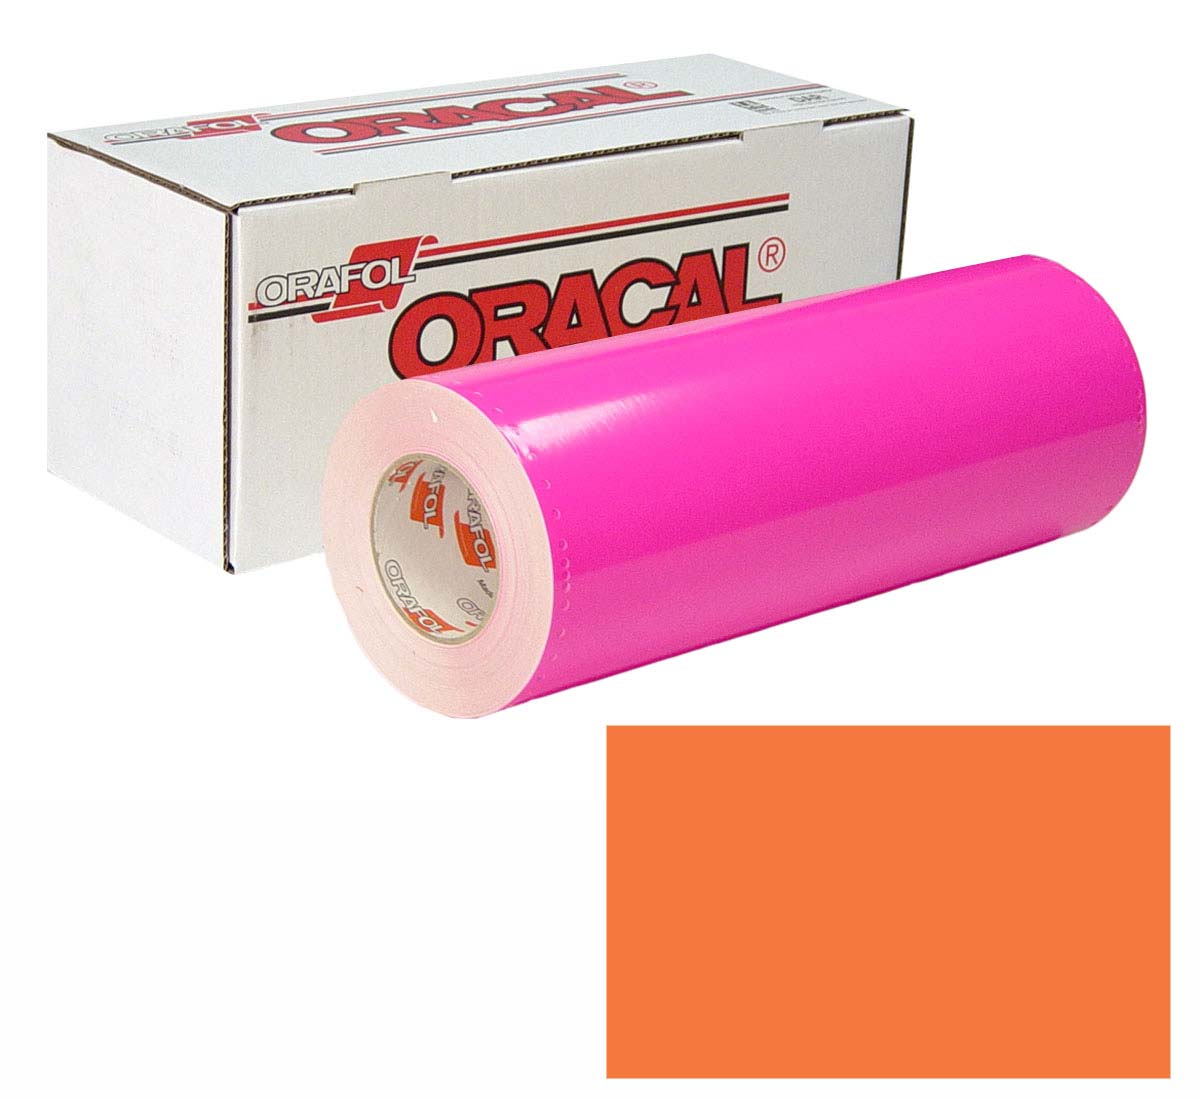 ORACAL 7510 Fluor 30in X 10yd 038 Red Orng